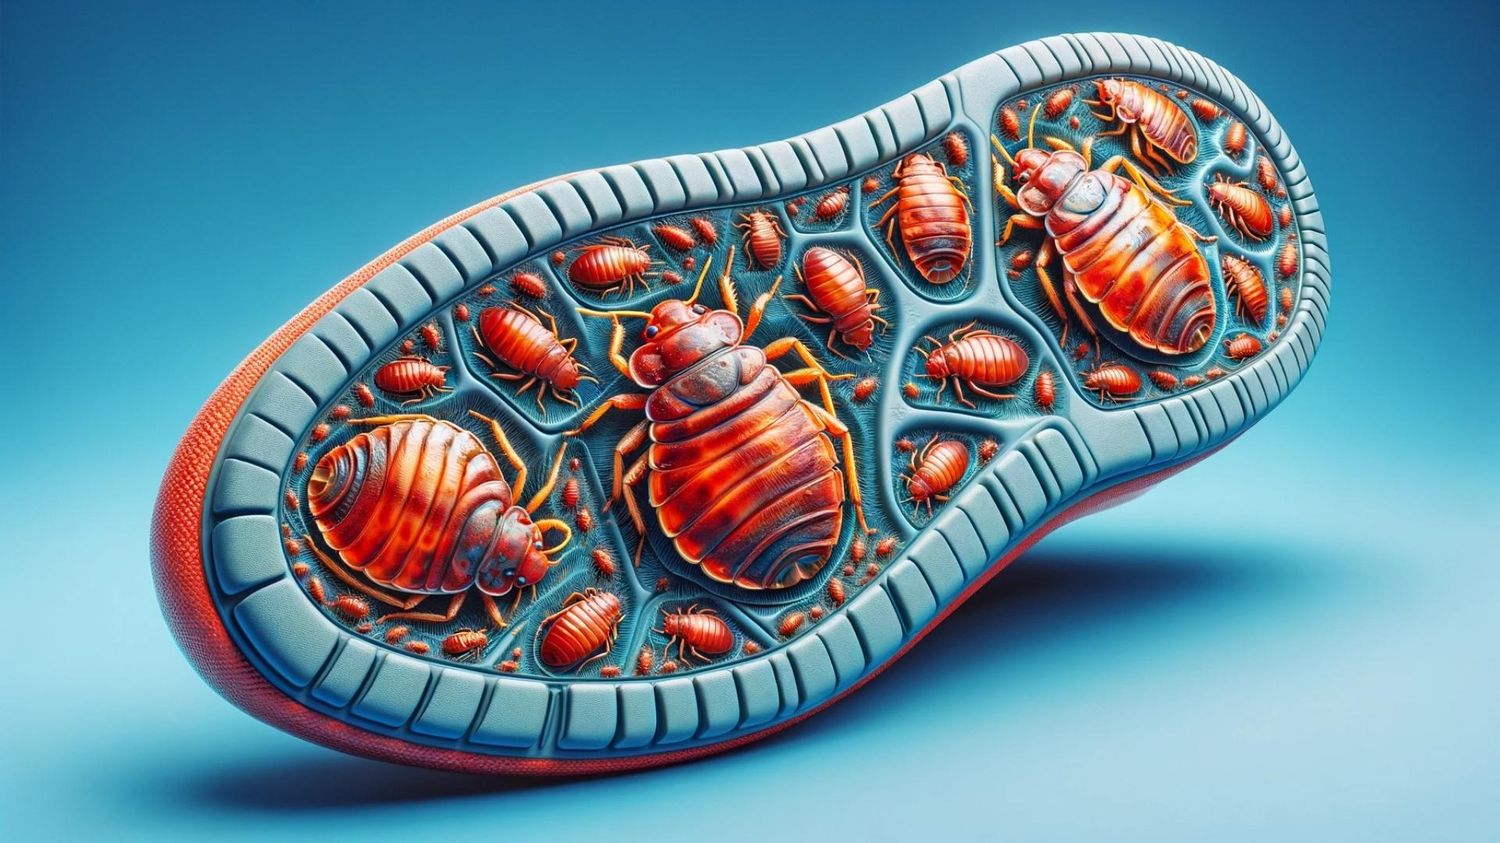 Bed Bug in Shoes